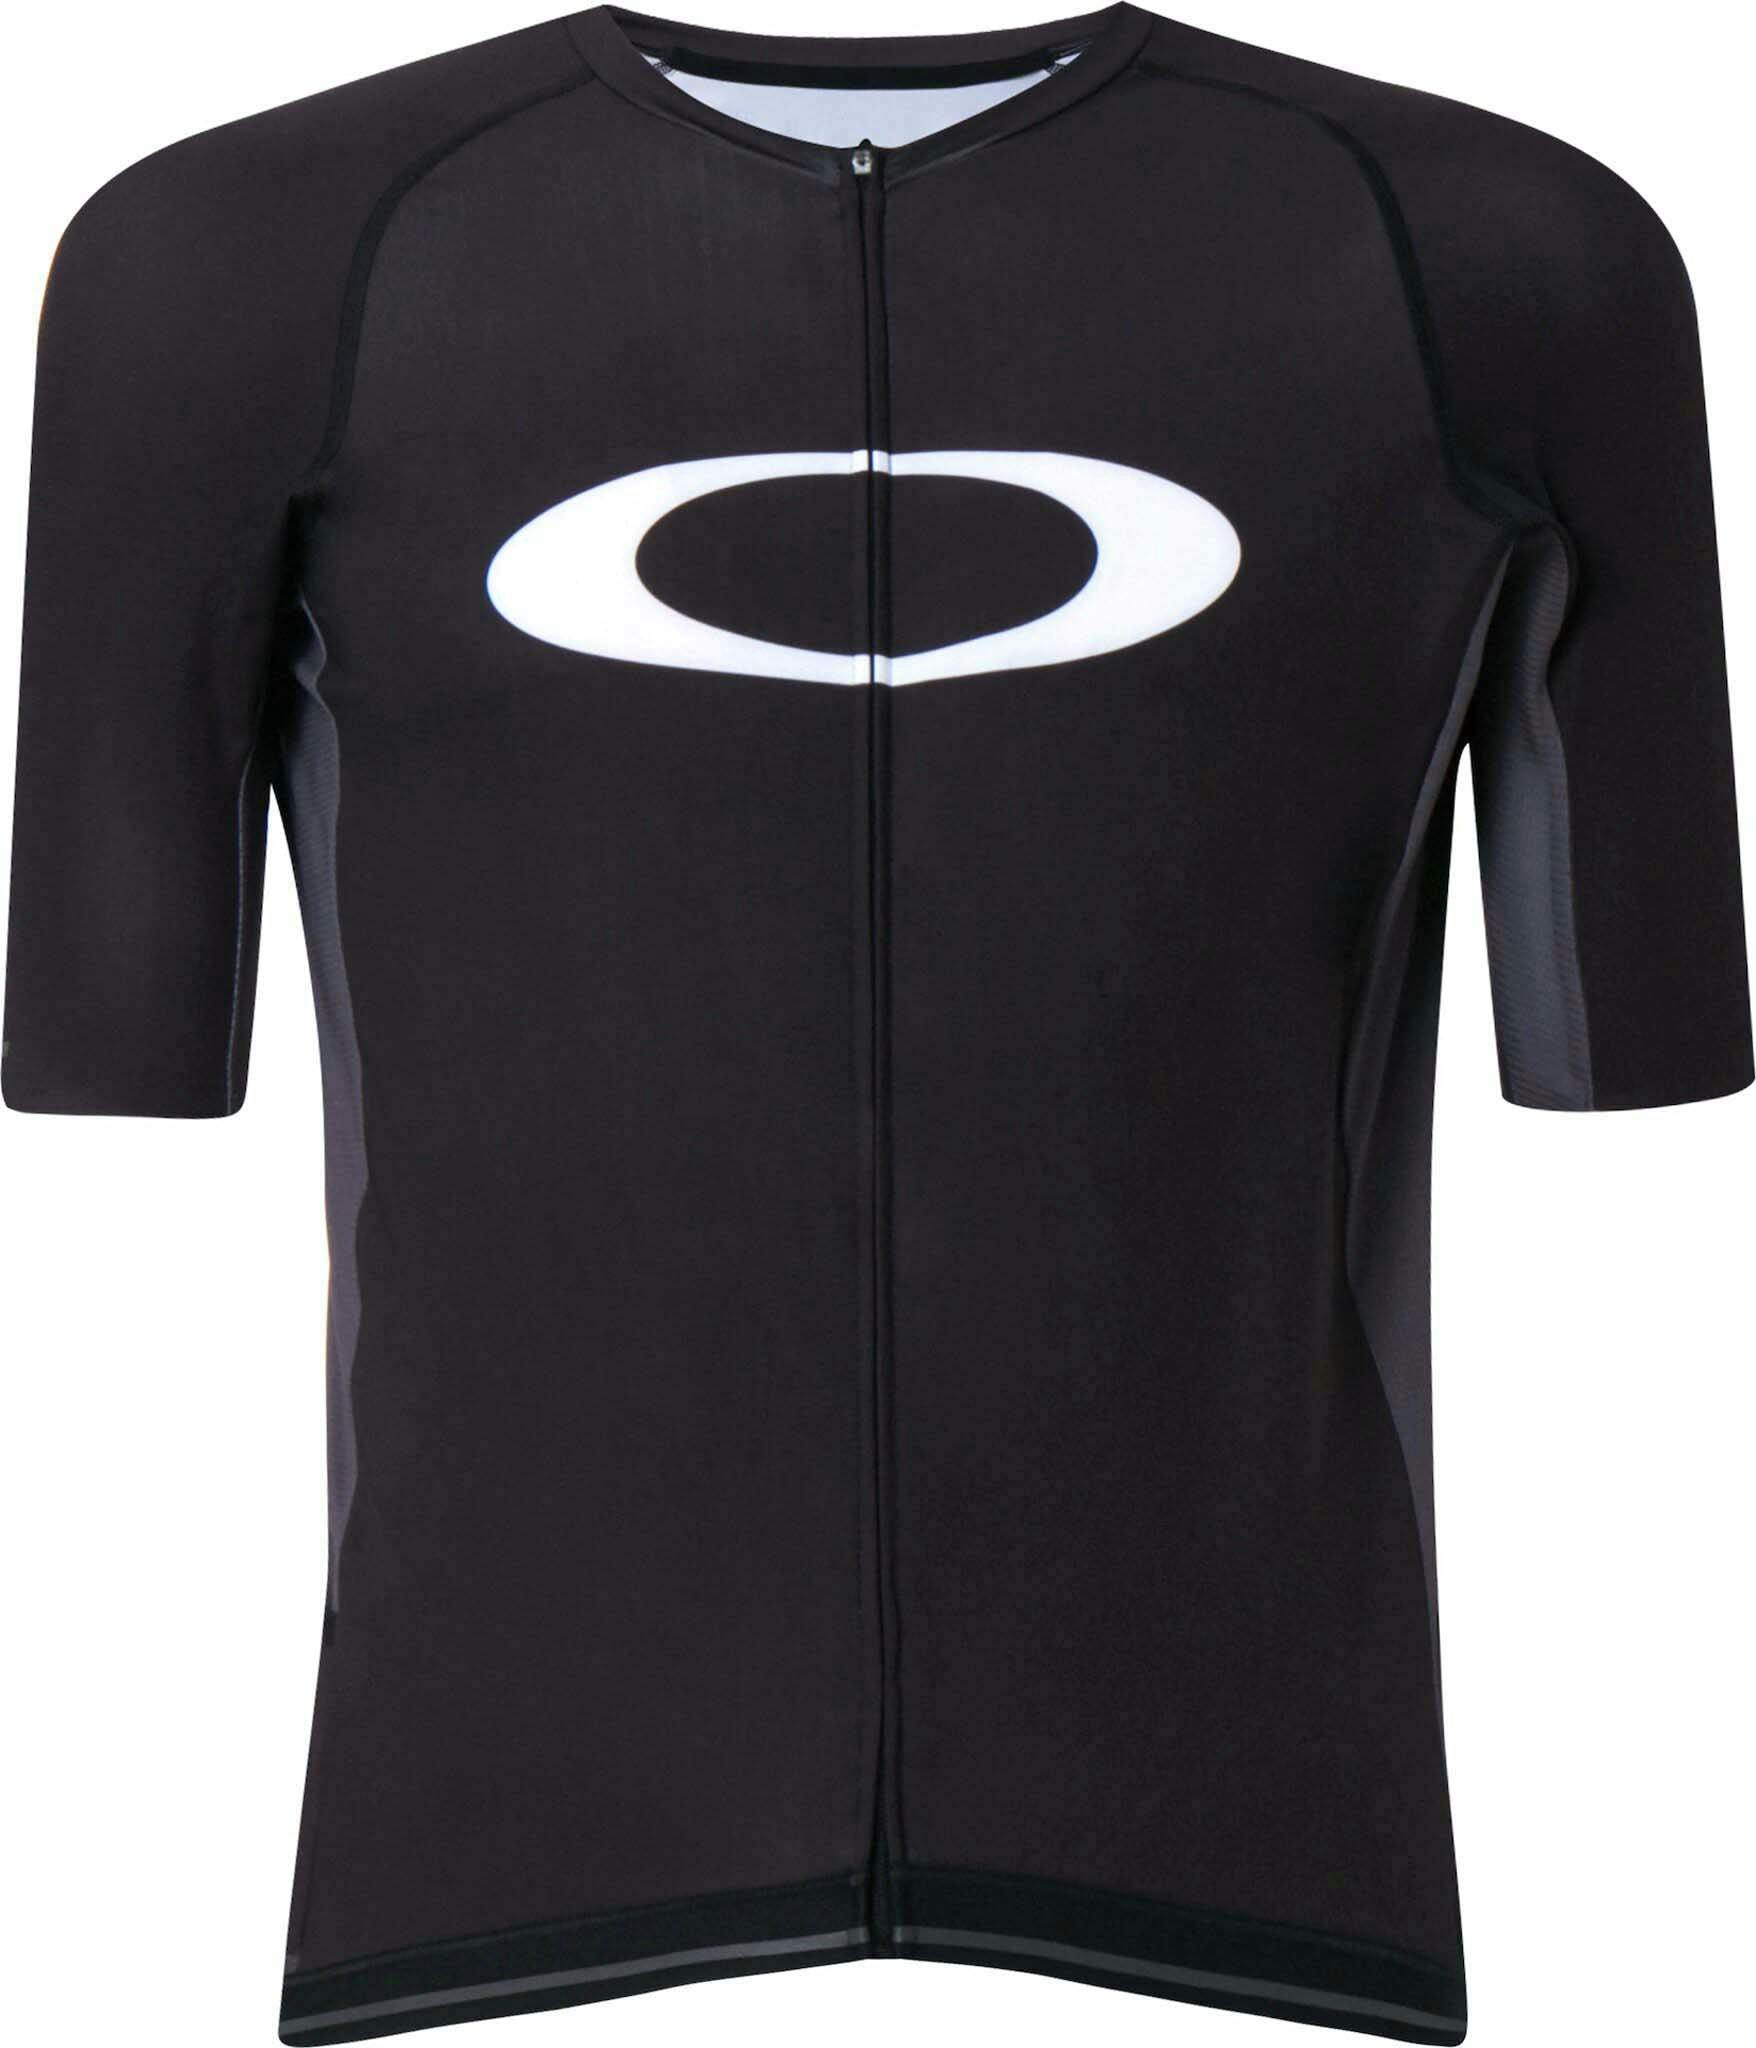 Product image for Icon Jersey 2.0 - Men's